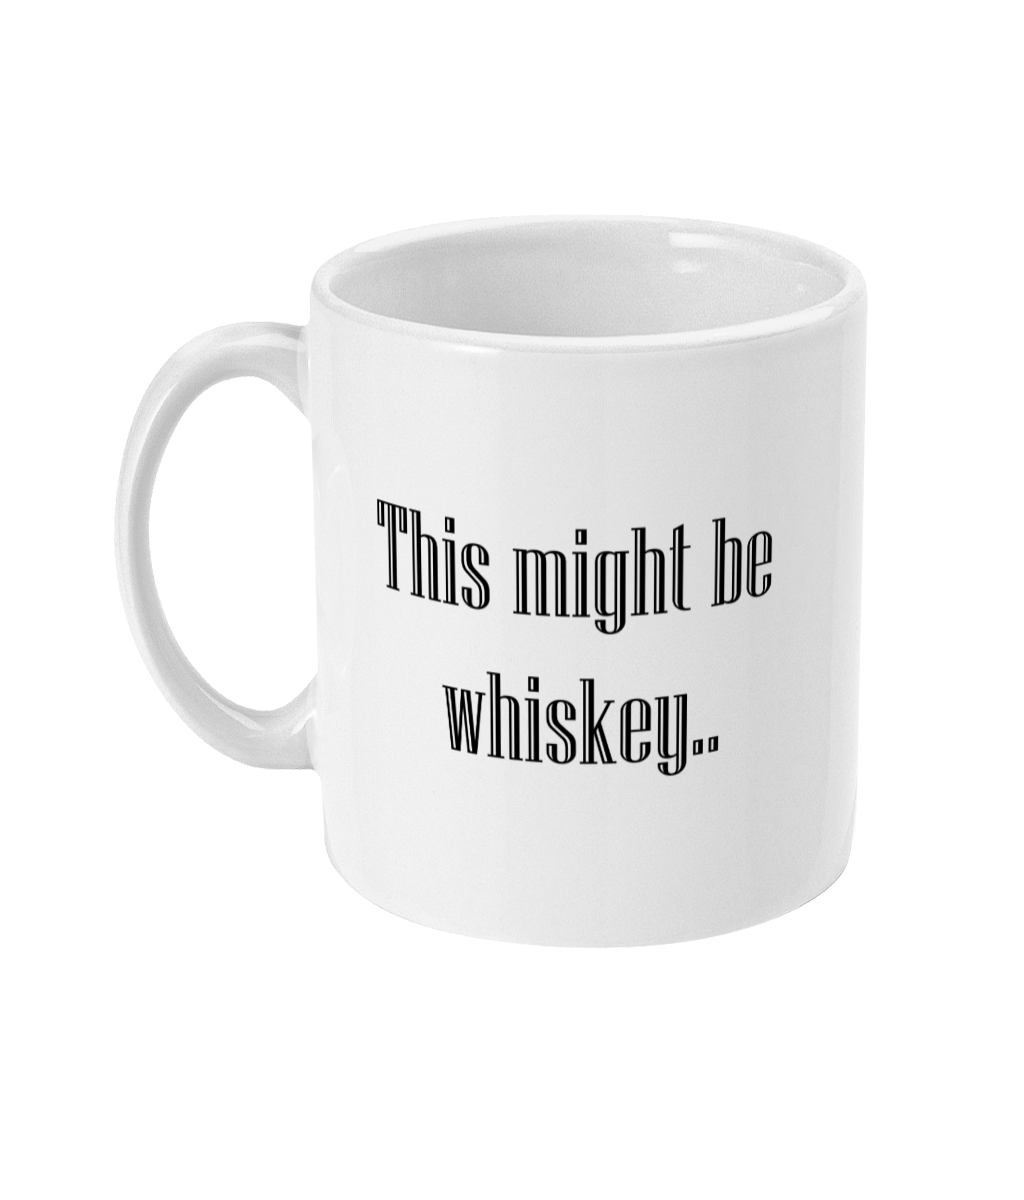 An 11oz glossy mug with the words 'This might be whiskey..' printed in it's centre in large font. The mug is placed in front of a plain white background.